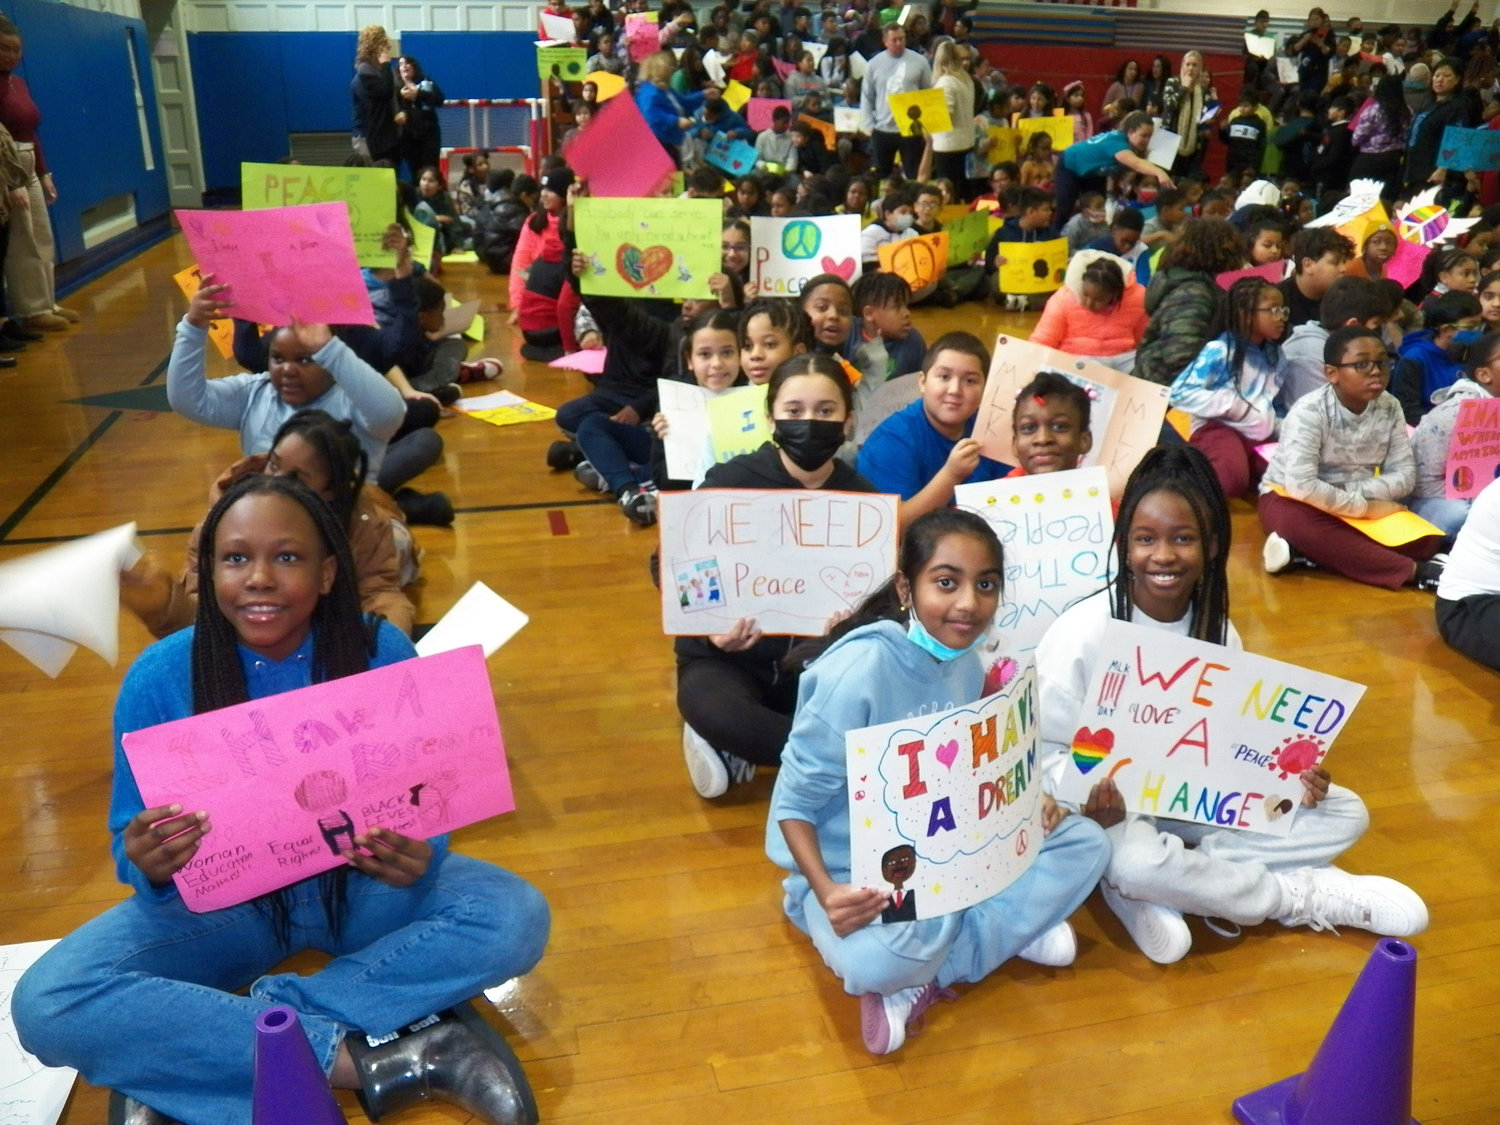 Gotham Avenue School held its first Dr. Martin Luther King Jr. Peace March on Jan. 13. Students gathered in the school’s gymnasium, sporting signs promoting peace and unity.